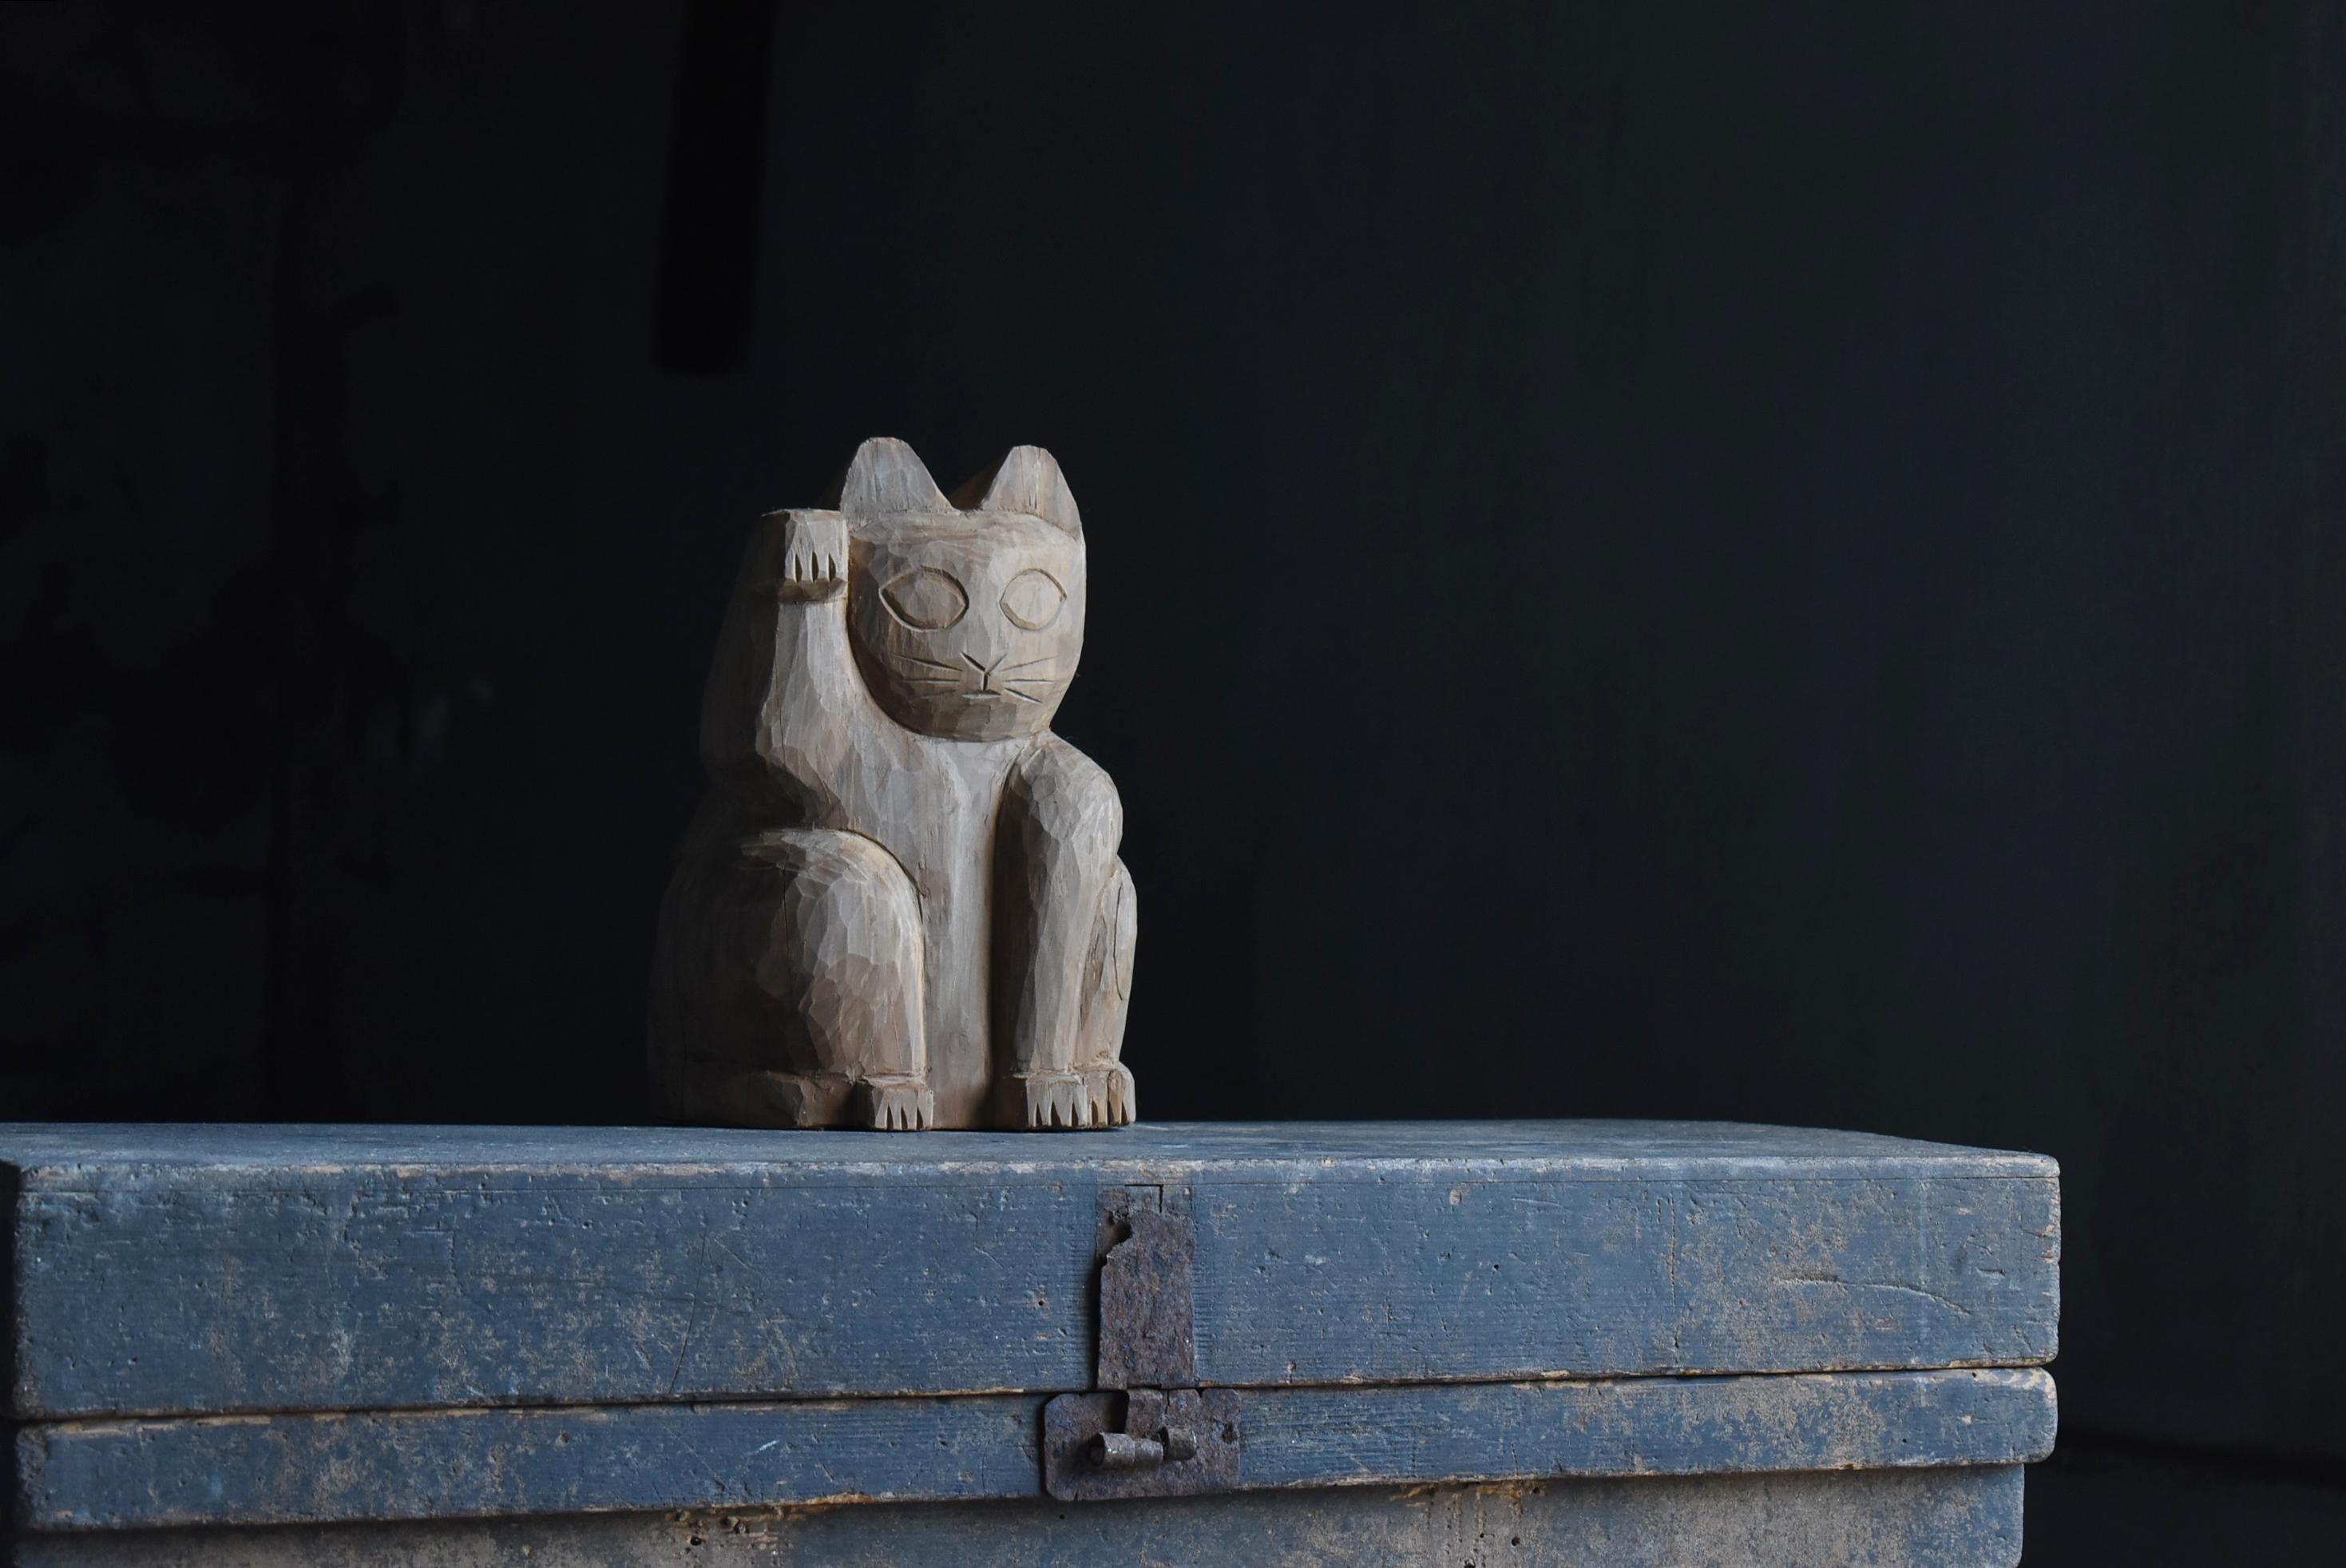 It is an old Japanese wood carving beckoning cat.
It is an item from the 1950s to the 1970s.
The material seems to be cedar.

In Japan, it has been popular for a long time as a lucky charm of 